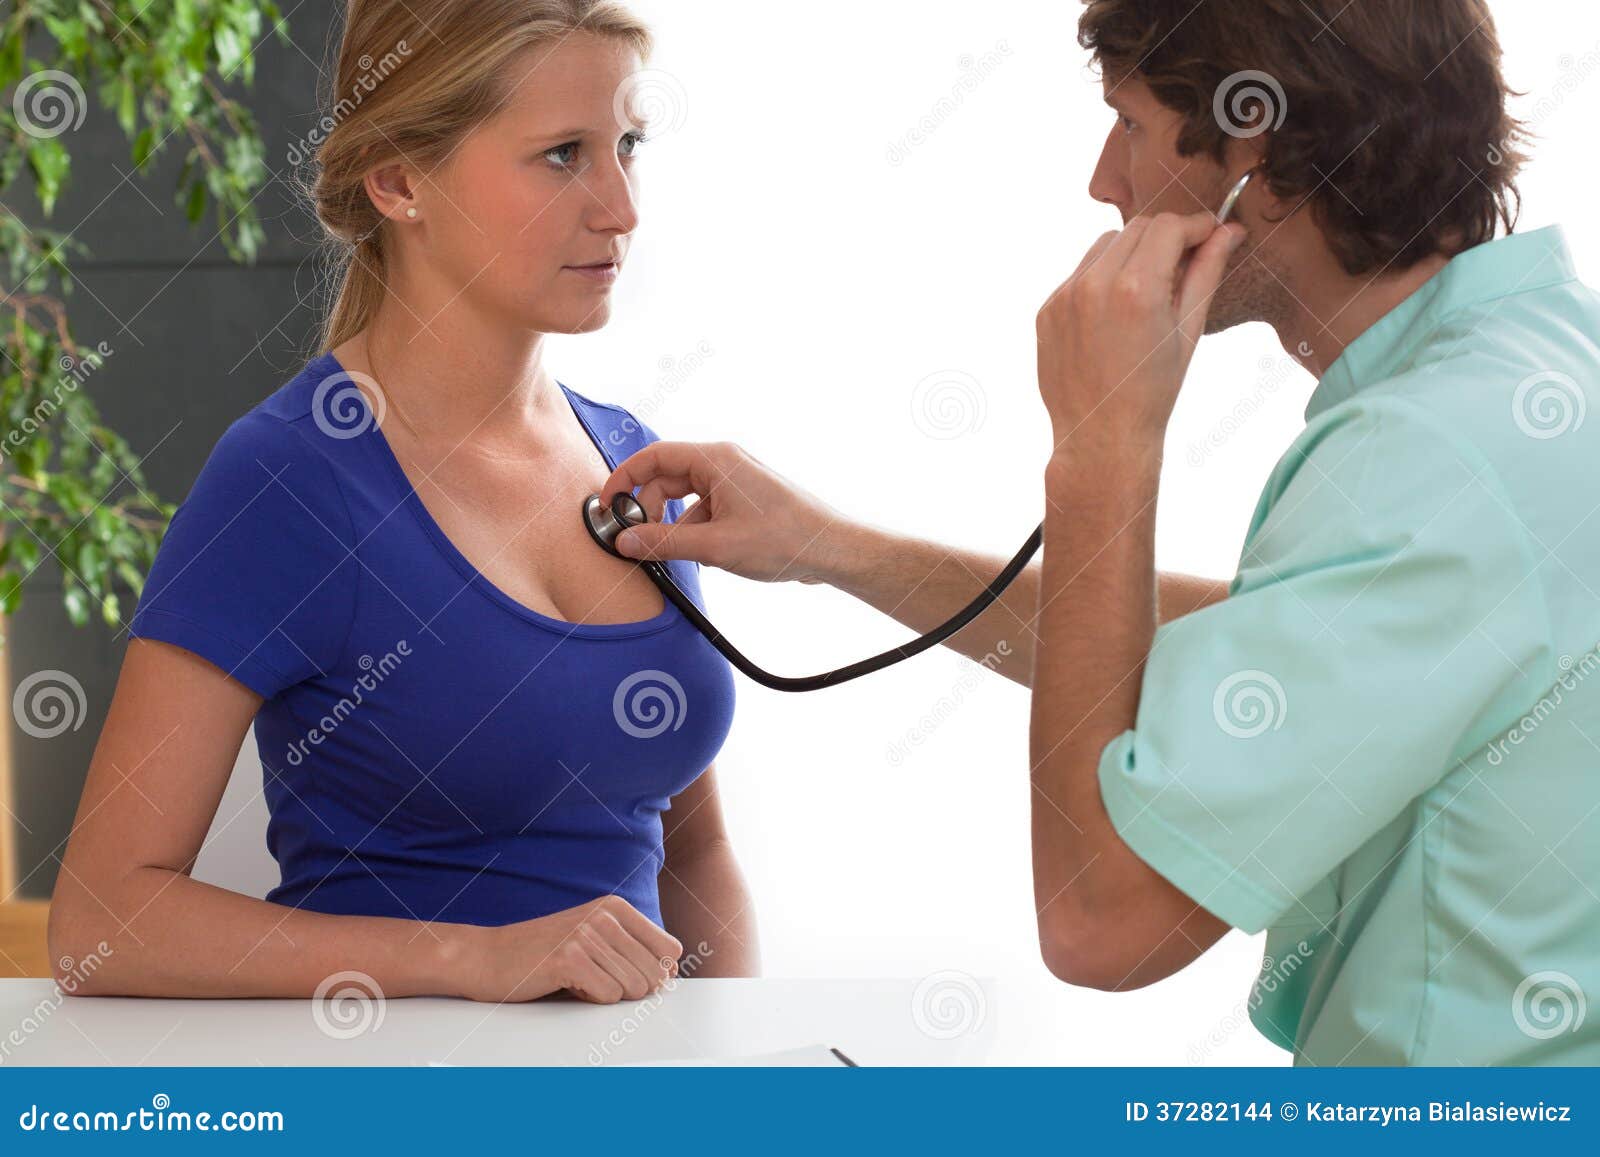 cardiologist testing a patient